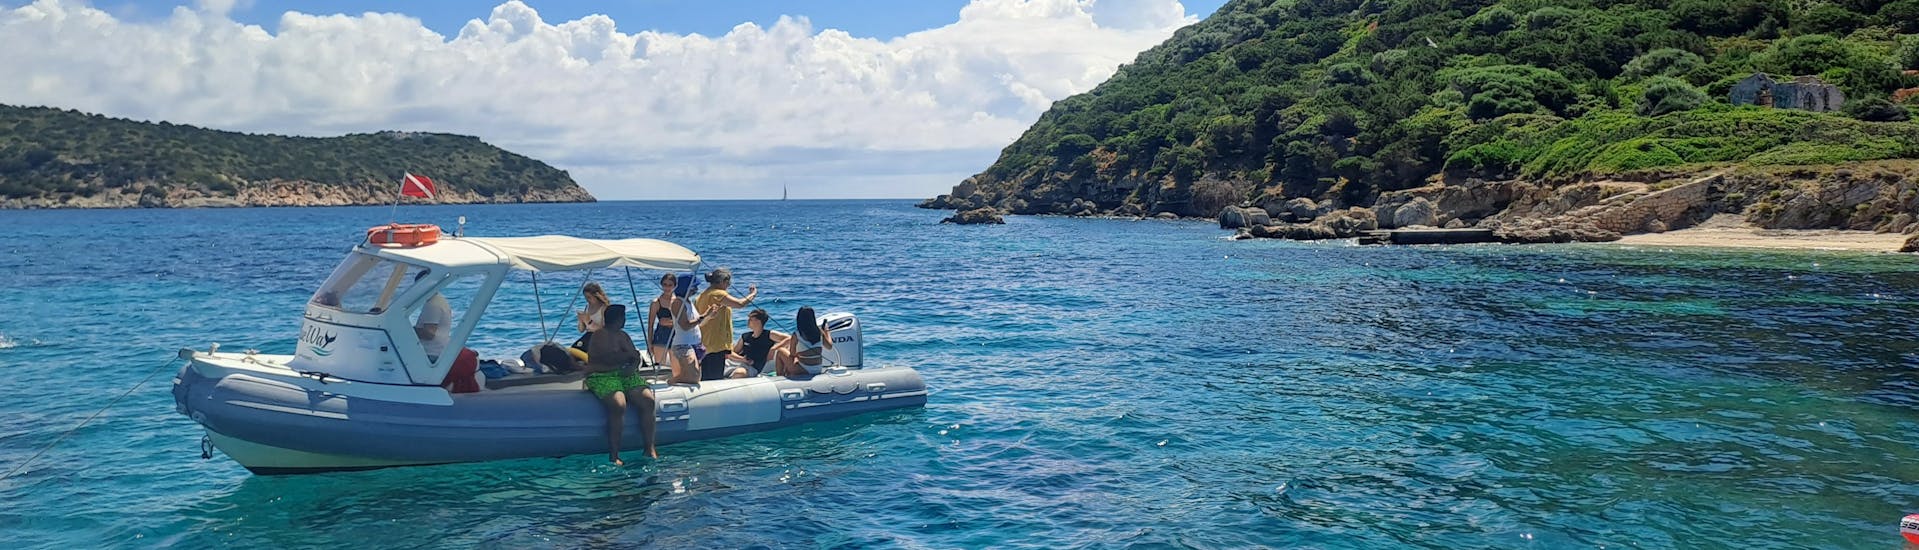 View during the Boat Tour to Figarolo and Capo Figari with Dolphing Watching & Snorkeling with Blue Way - Sea Experiences.